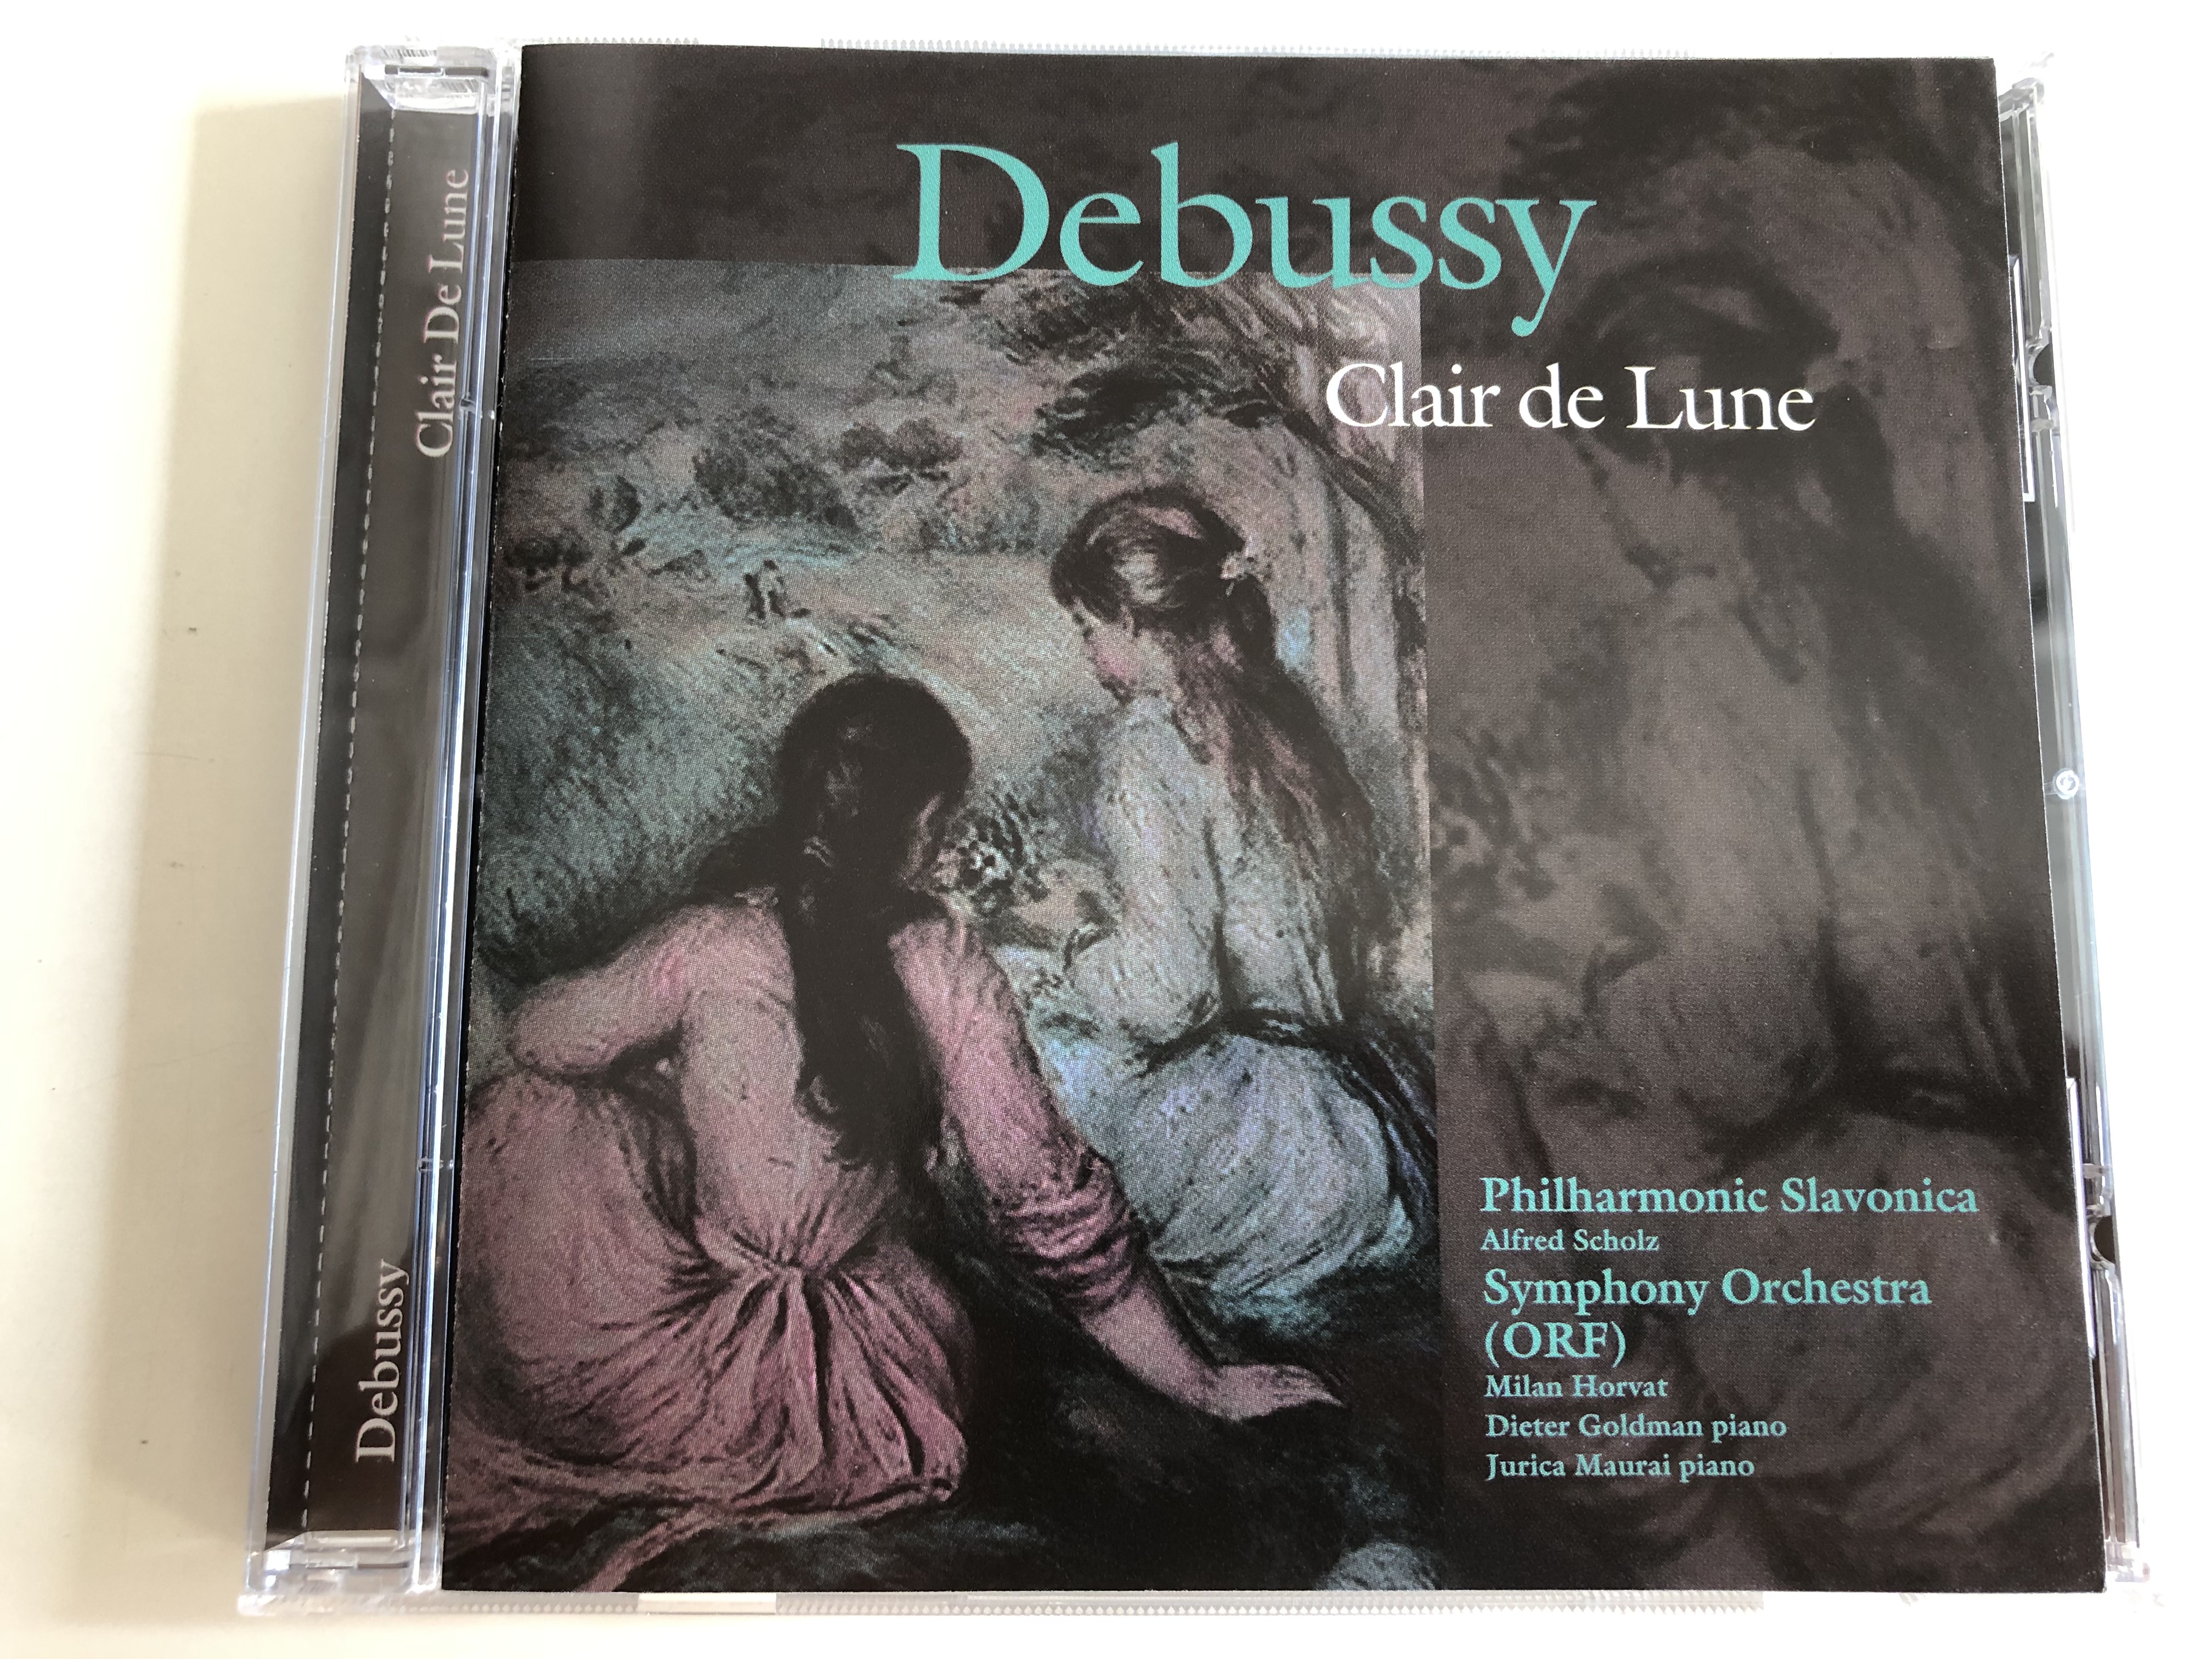 debussy-clair-de-lune-philharmonic-slavonica-conducted-by-alfred-scholz-symphony-orchestra-orf-milan-horvat-dieter-goldman-piano-jurica-maurai-piano-audio-cd-1998-9010-2-1-.jpg